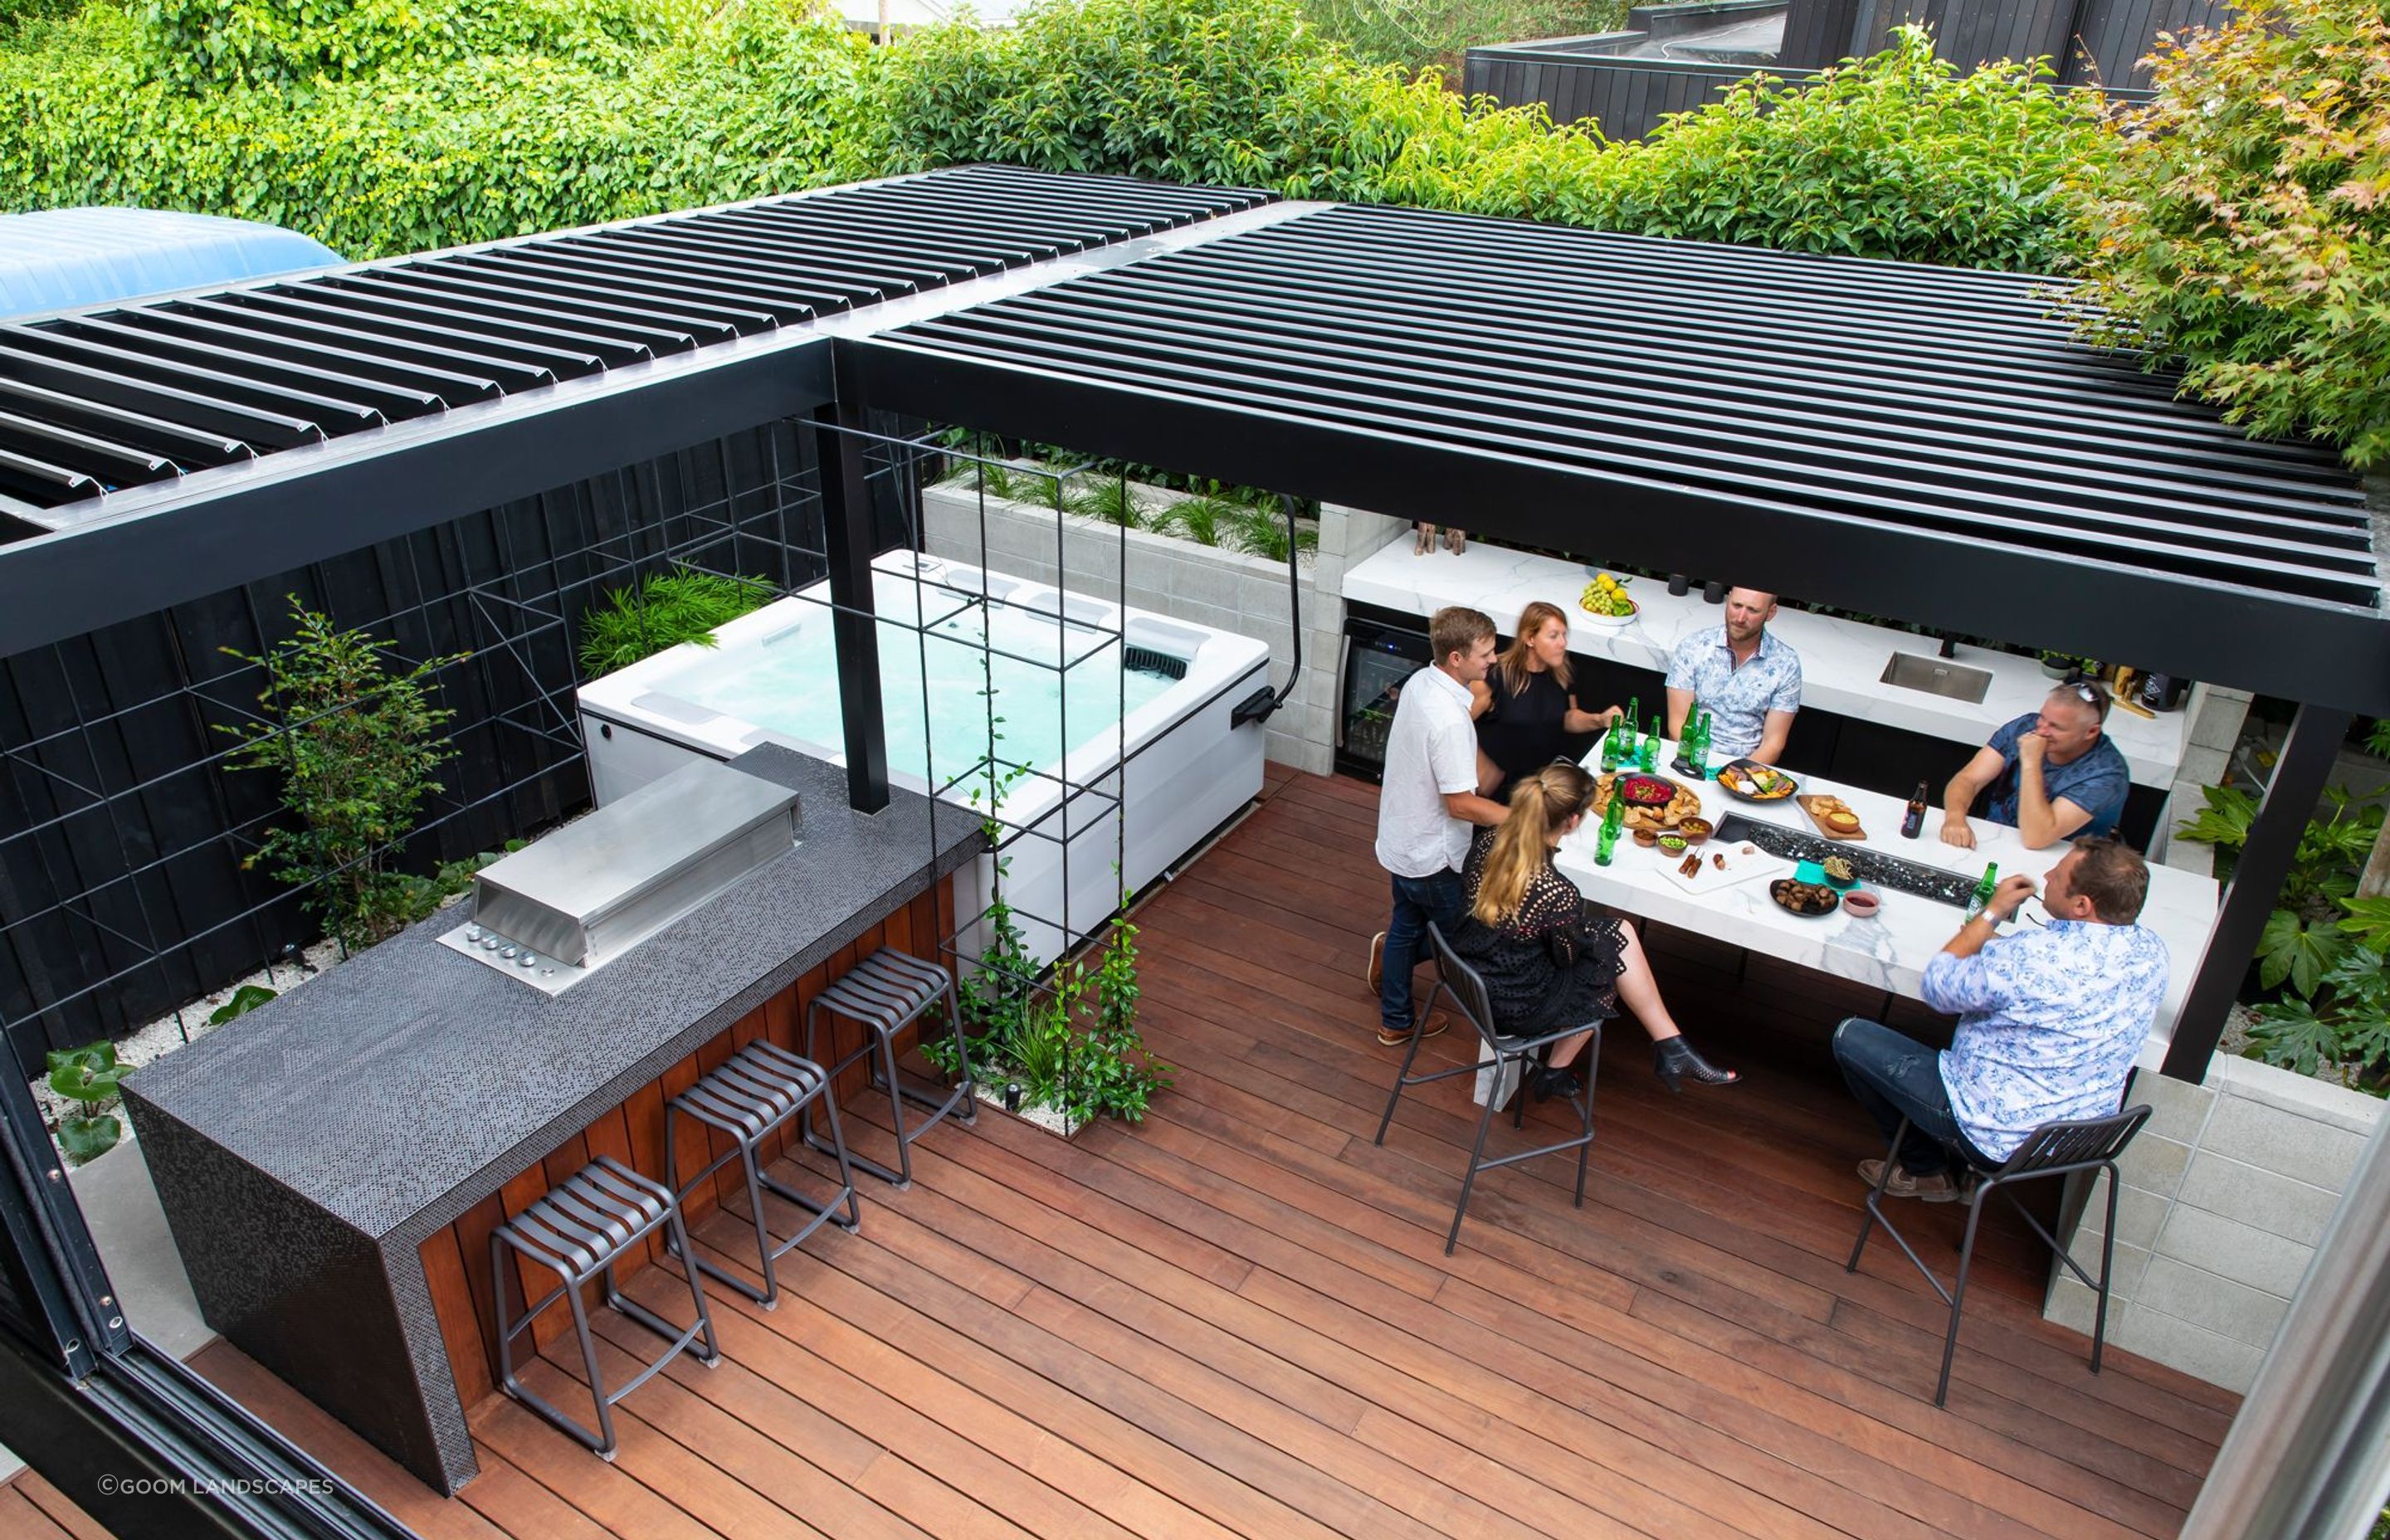 This urban retreat by Goom Landscapes shows the vibrancy of purpleheart decking